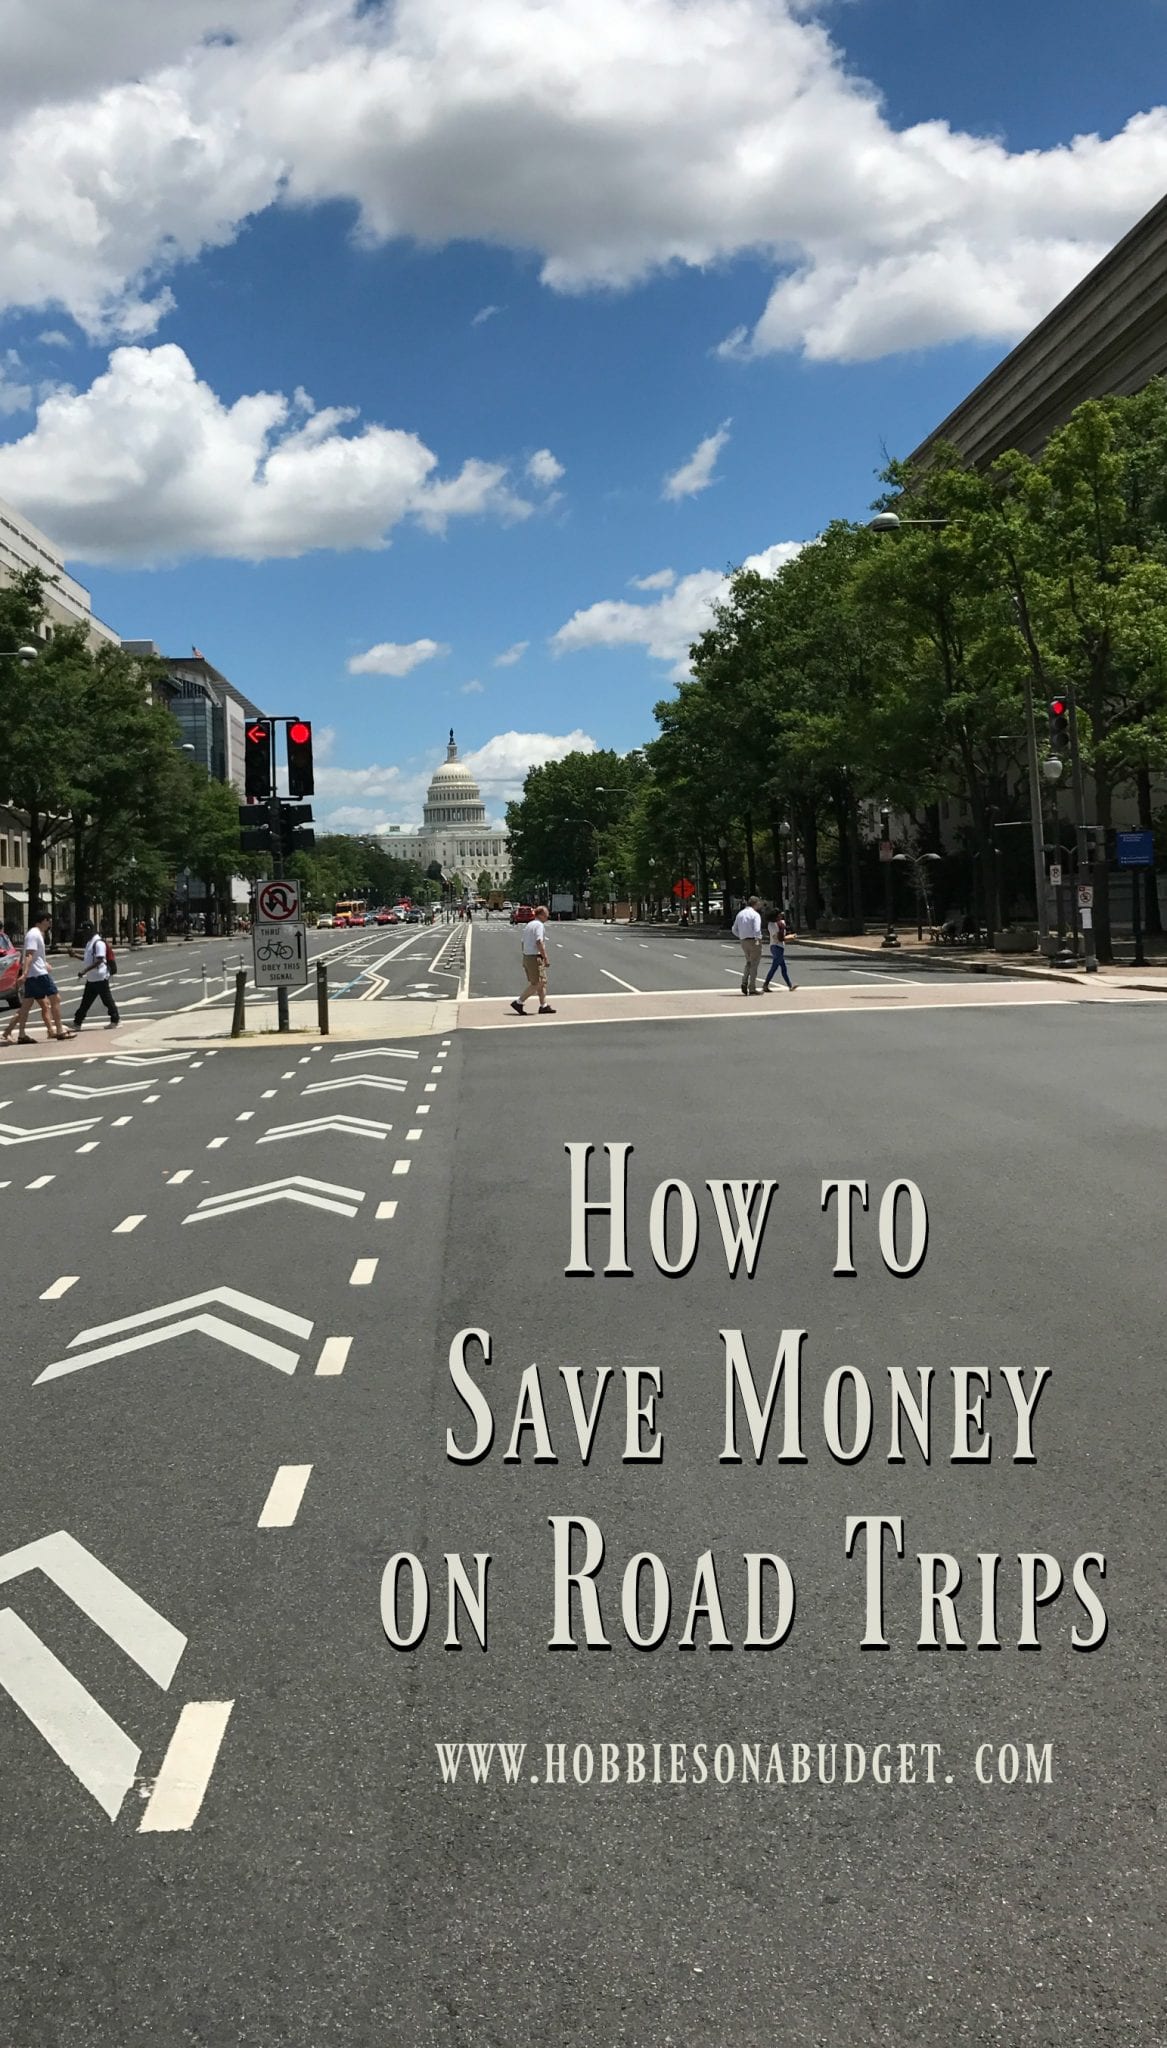 How to Save Money on Road Trips